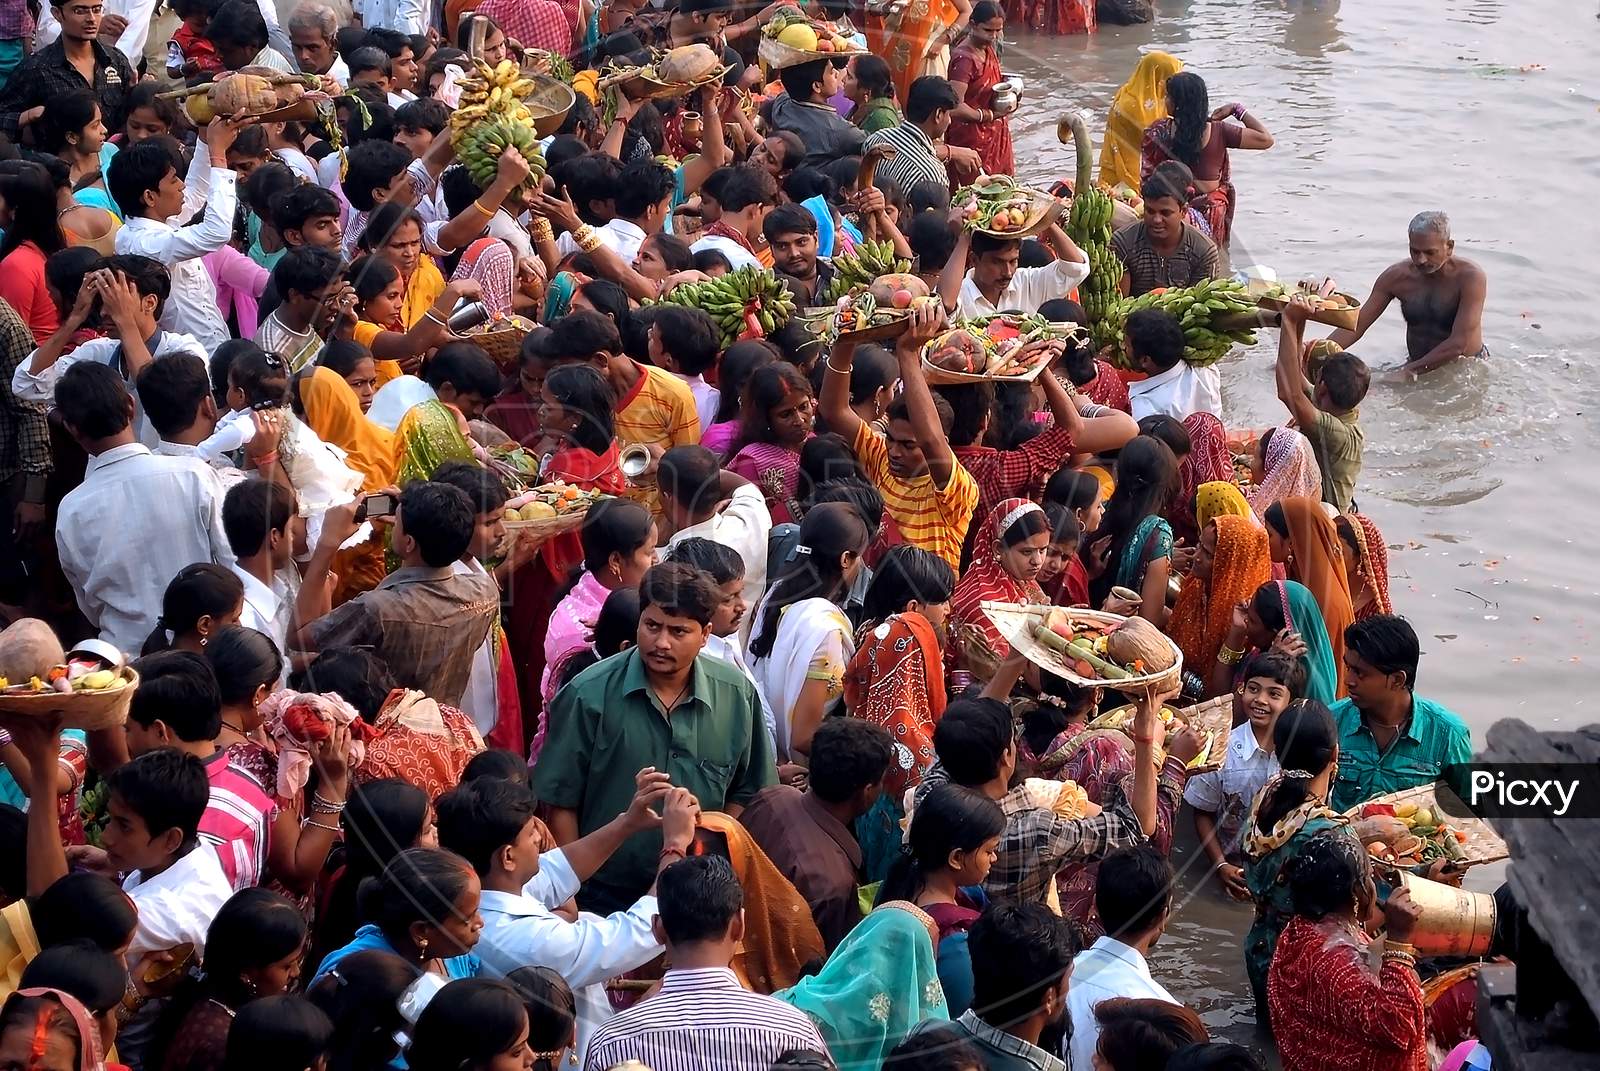 Chat puja festival in the bank of river Ganga.